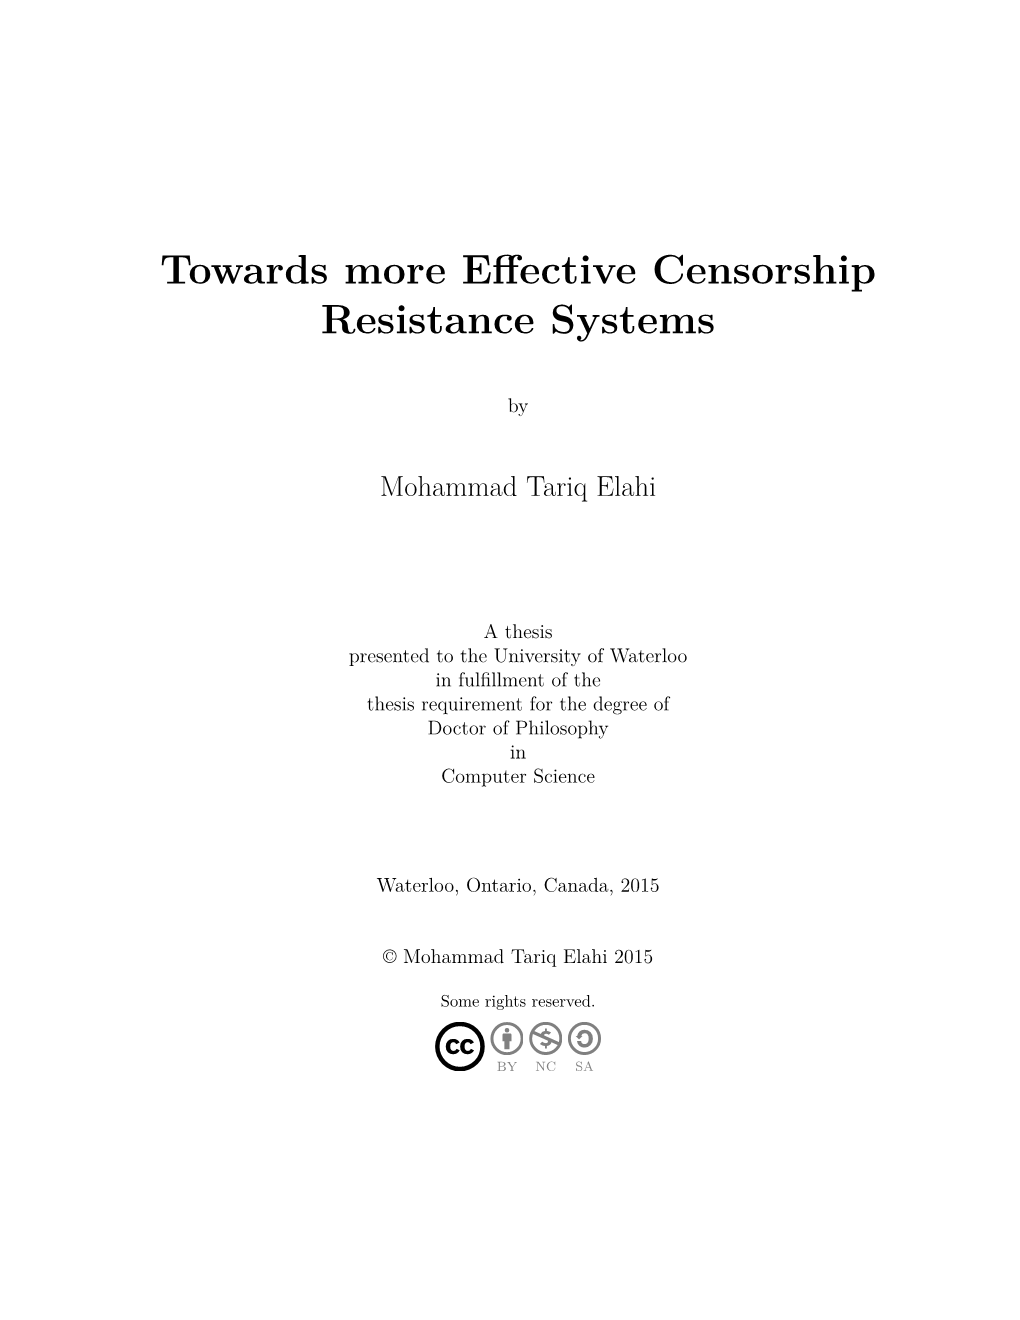 Towards More Effective Censorship Resistance Systems